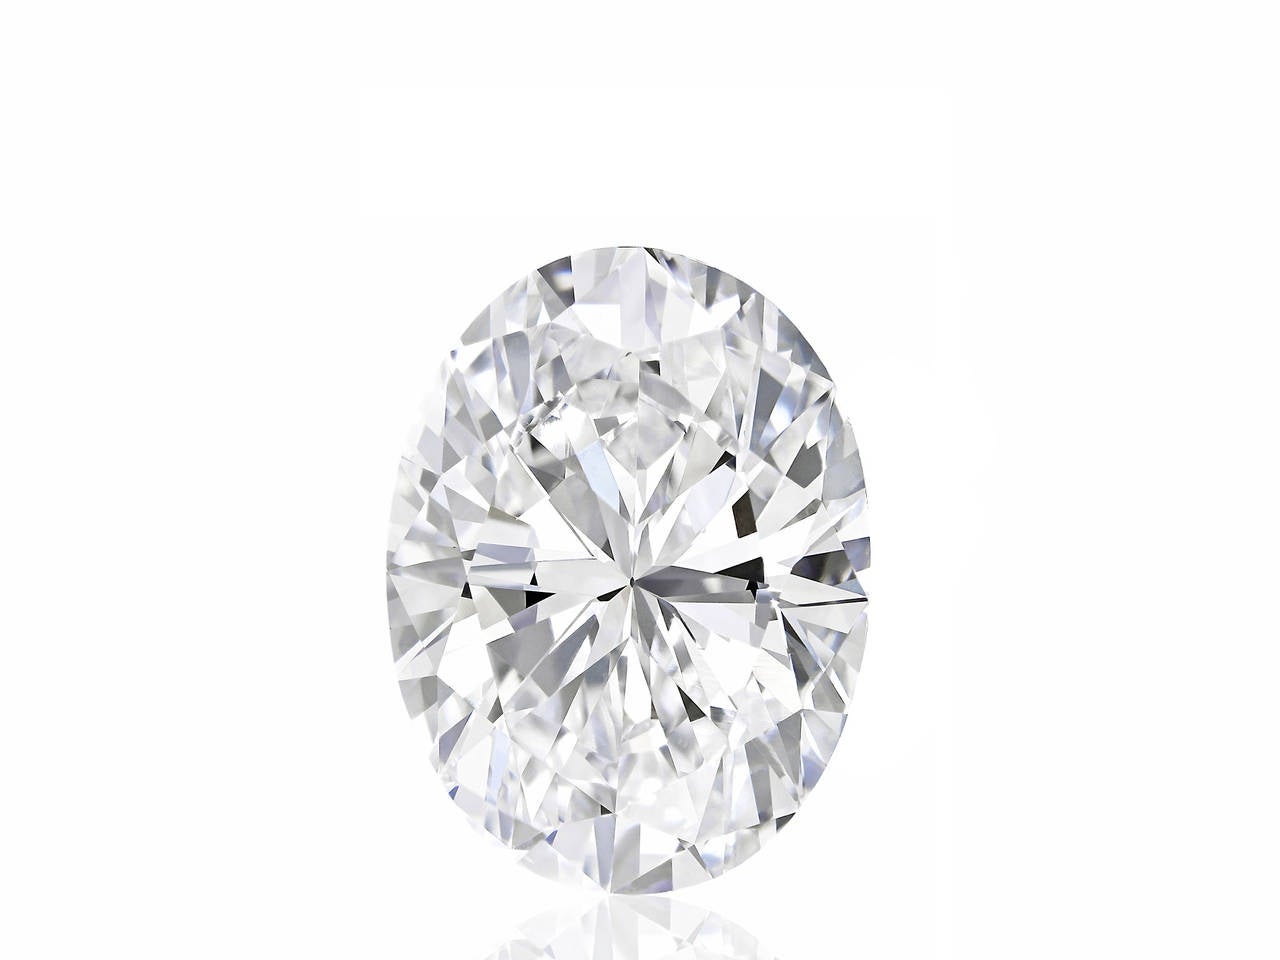 One loose oval brilliant diamond weighing 10.02 carats having a color and clarity of D / Internally flawless, measuring 16.50 x 12.29 x 7.78 mm with GIA certificate #5131281113, the diamond comes with diamond  type classification report stating the